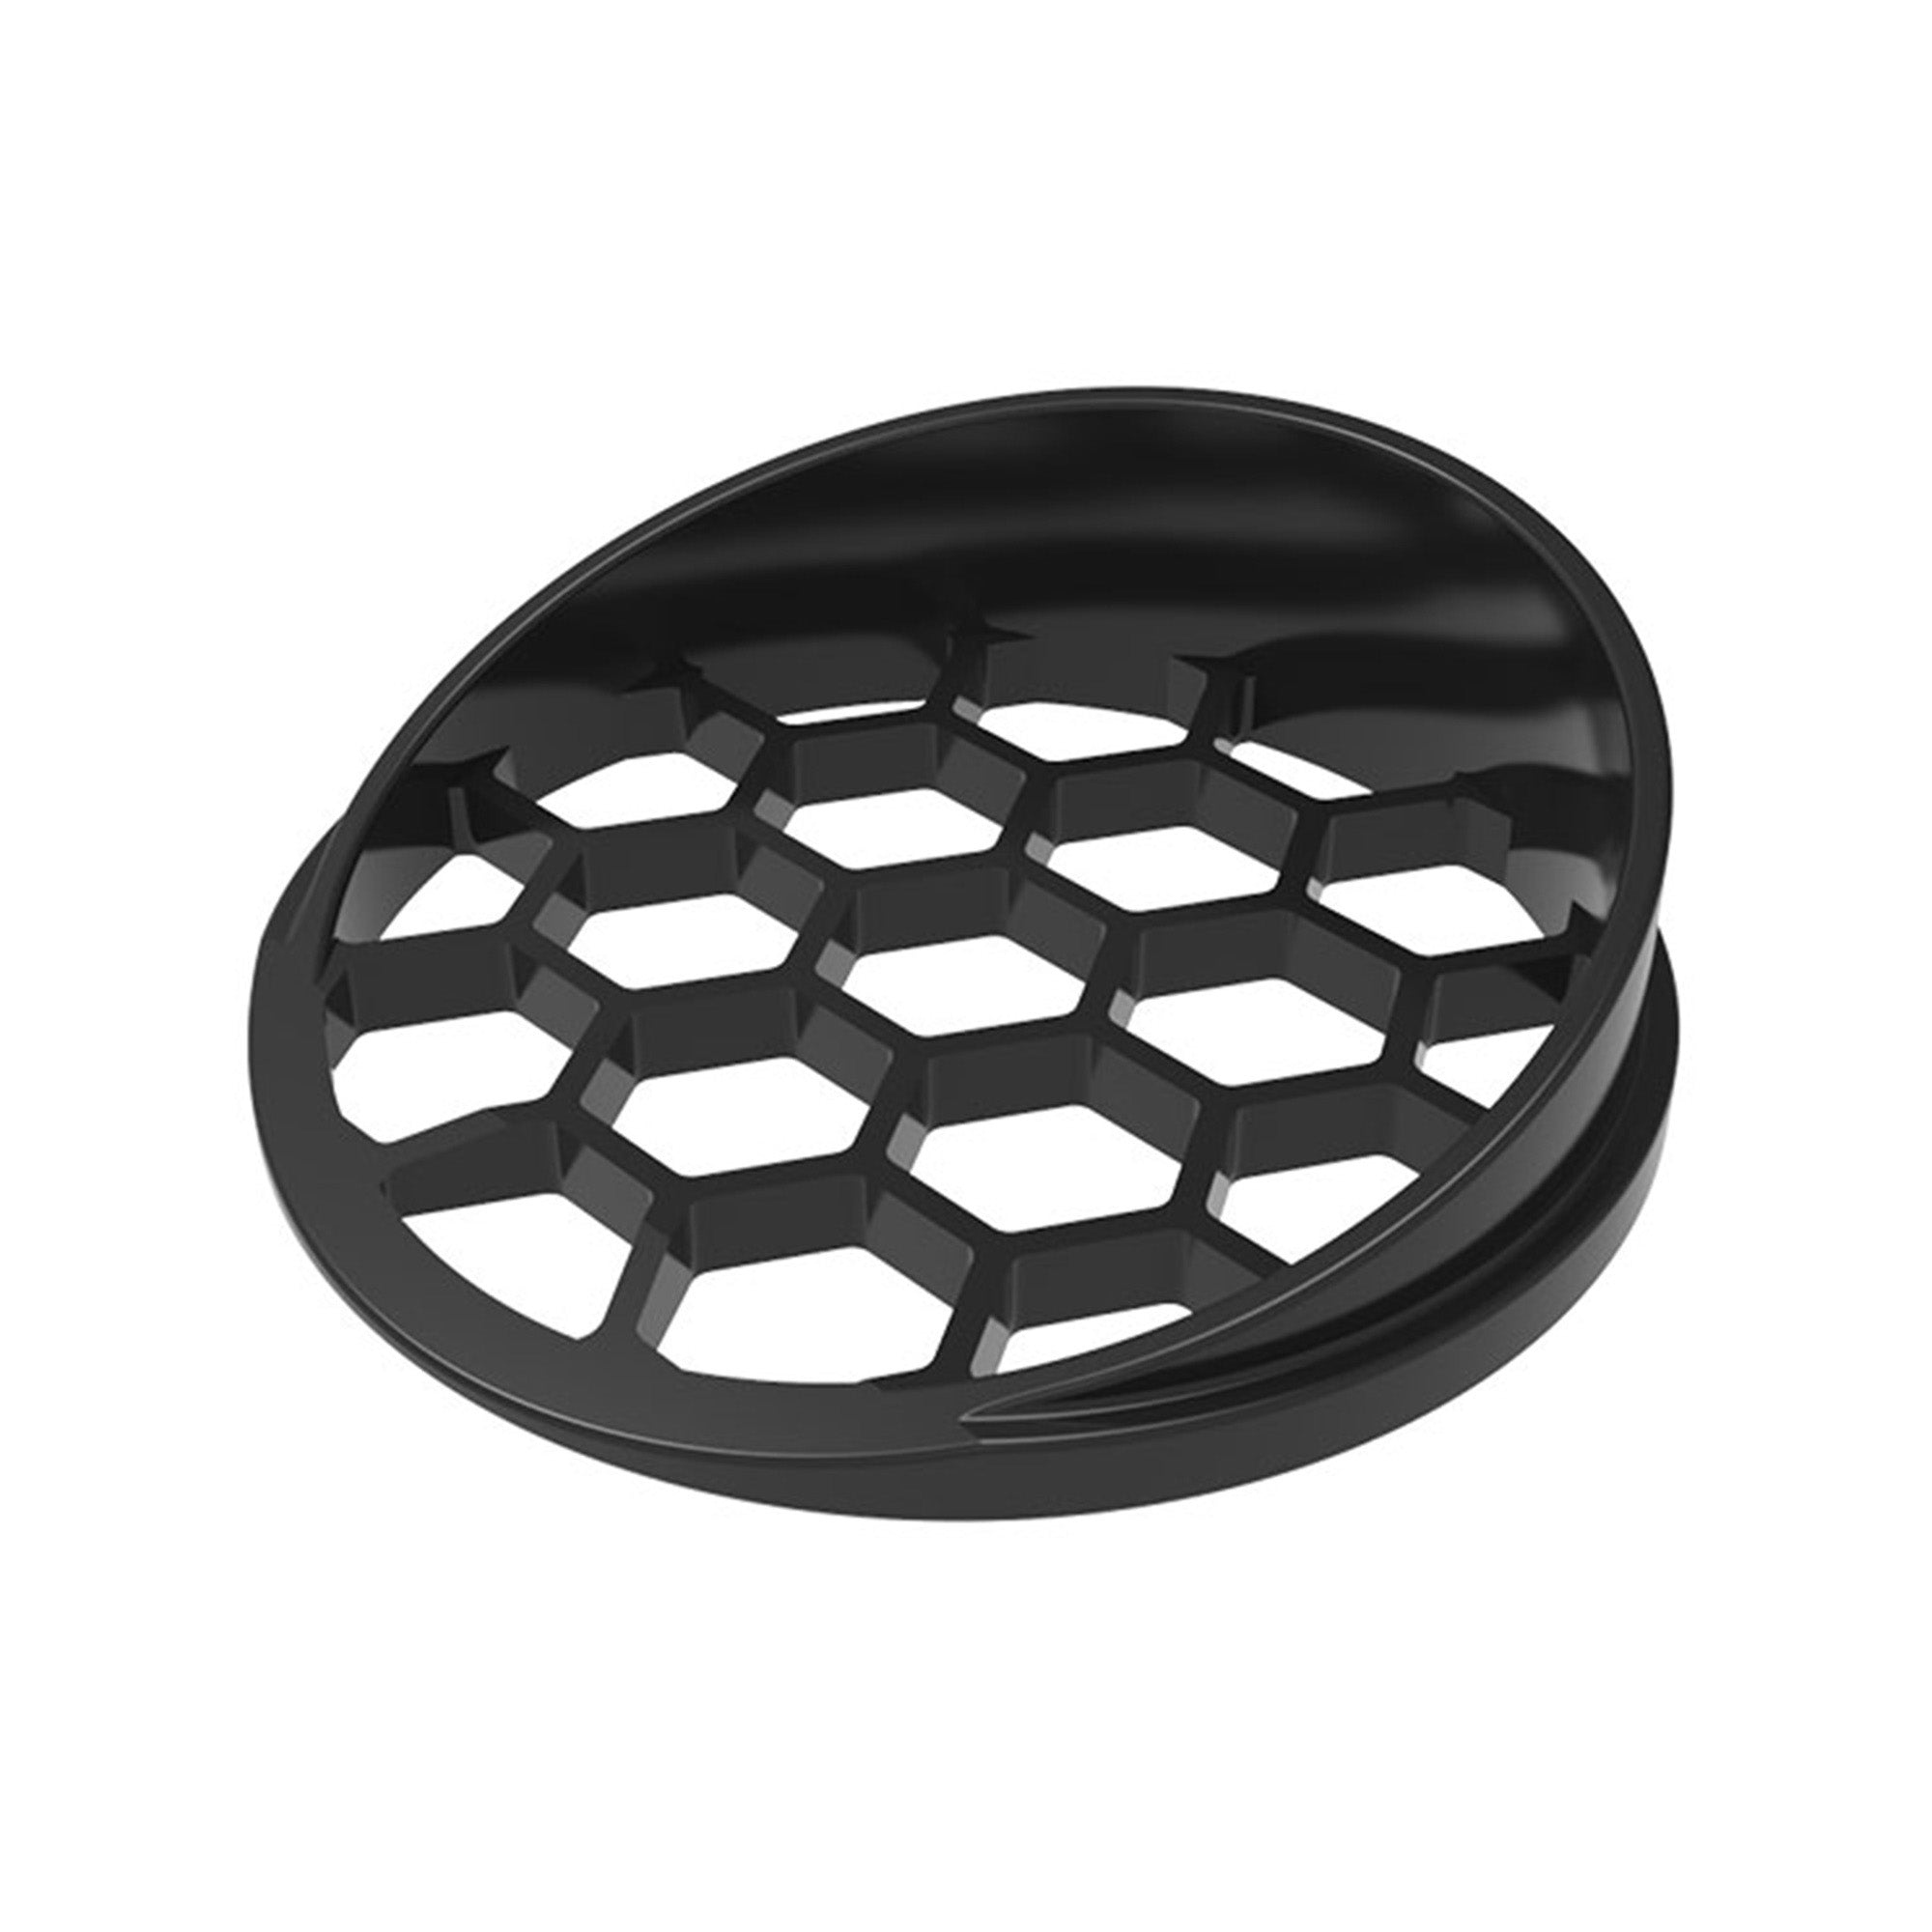 Snap-on Honeycomb Louver Glare Control for WAC Landscape Lighting Accent Light